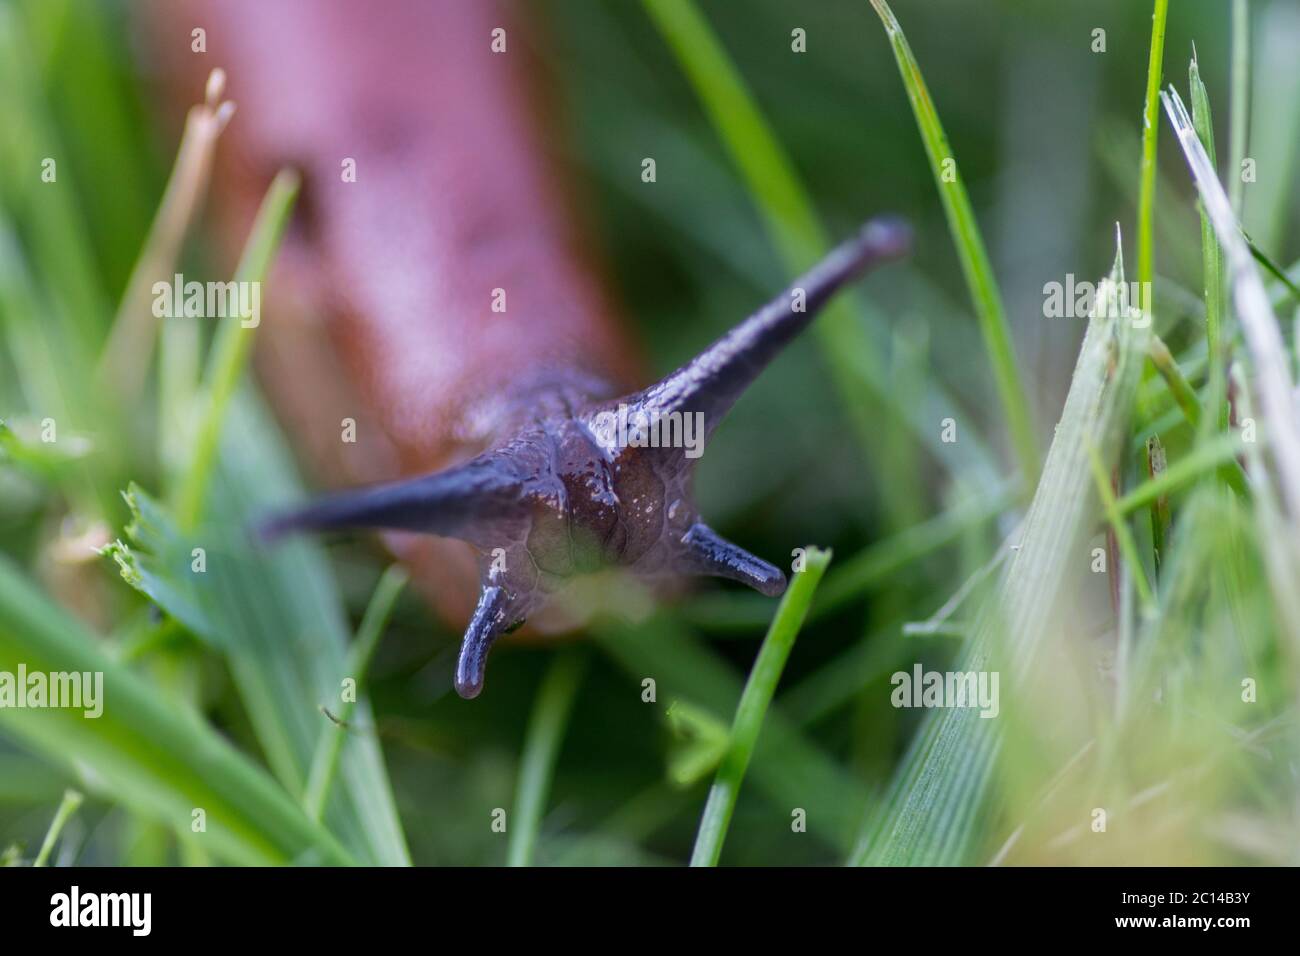 Macro shot of a Red slug in the grass Stock Photo